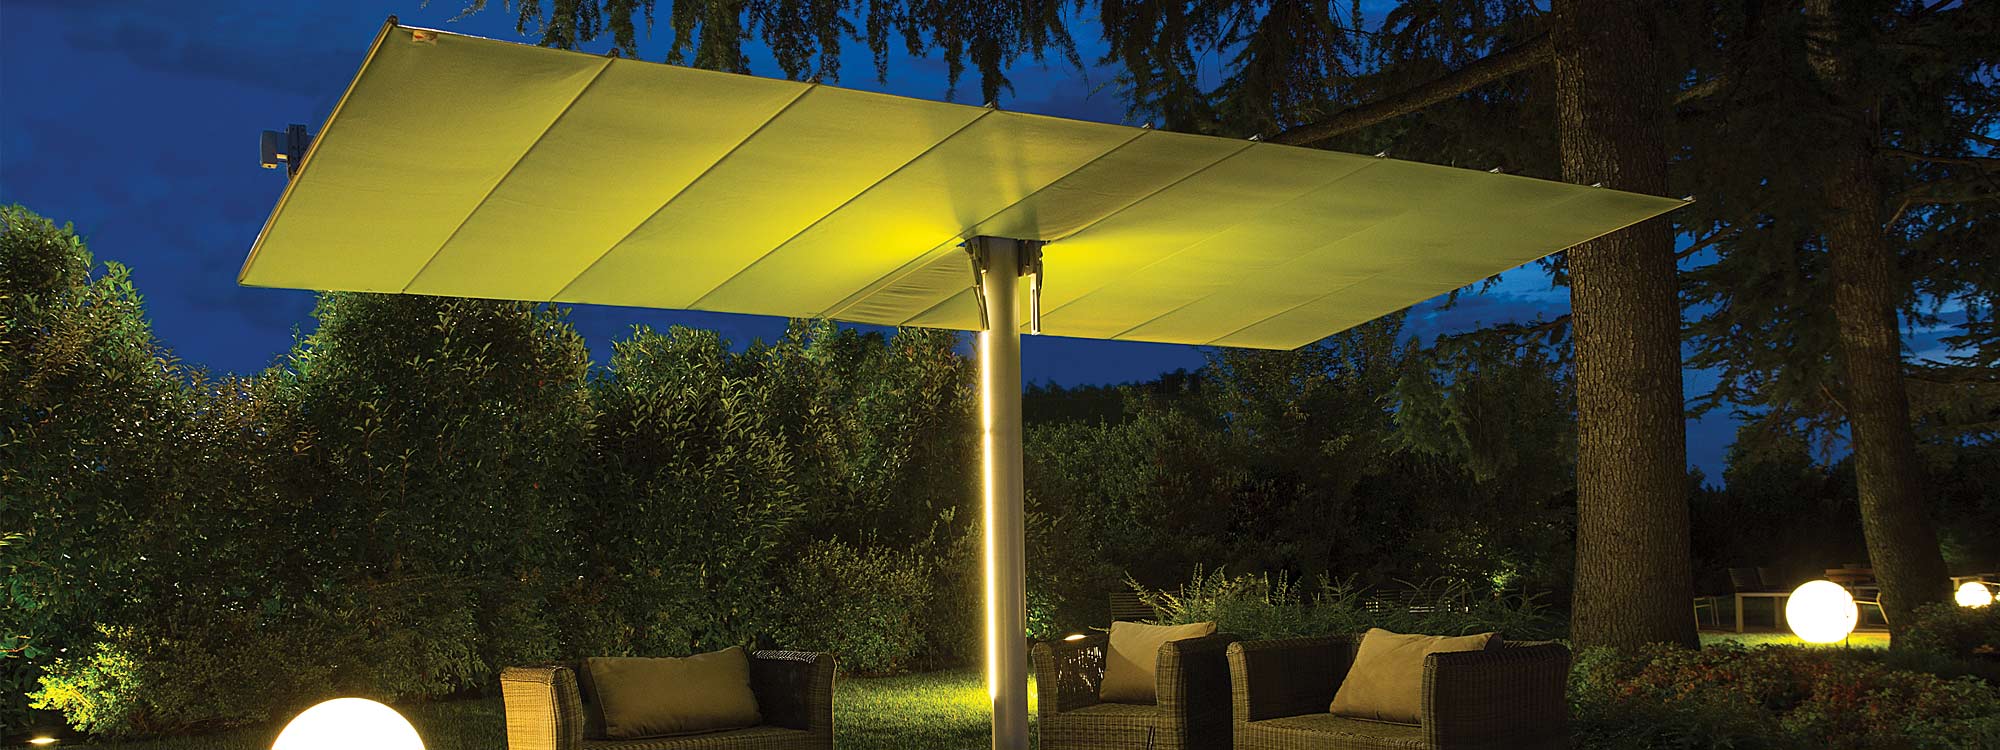 Nighttime shot featuring LED lighting option on Flexy Twin retractable sun shade